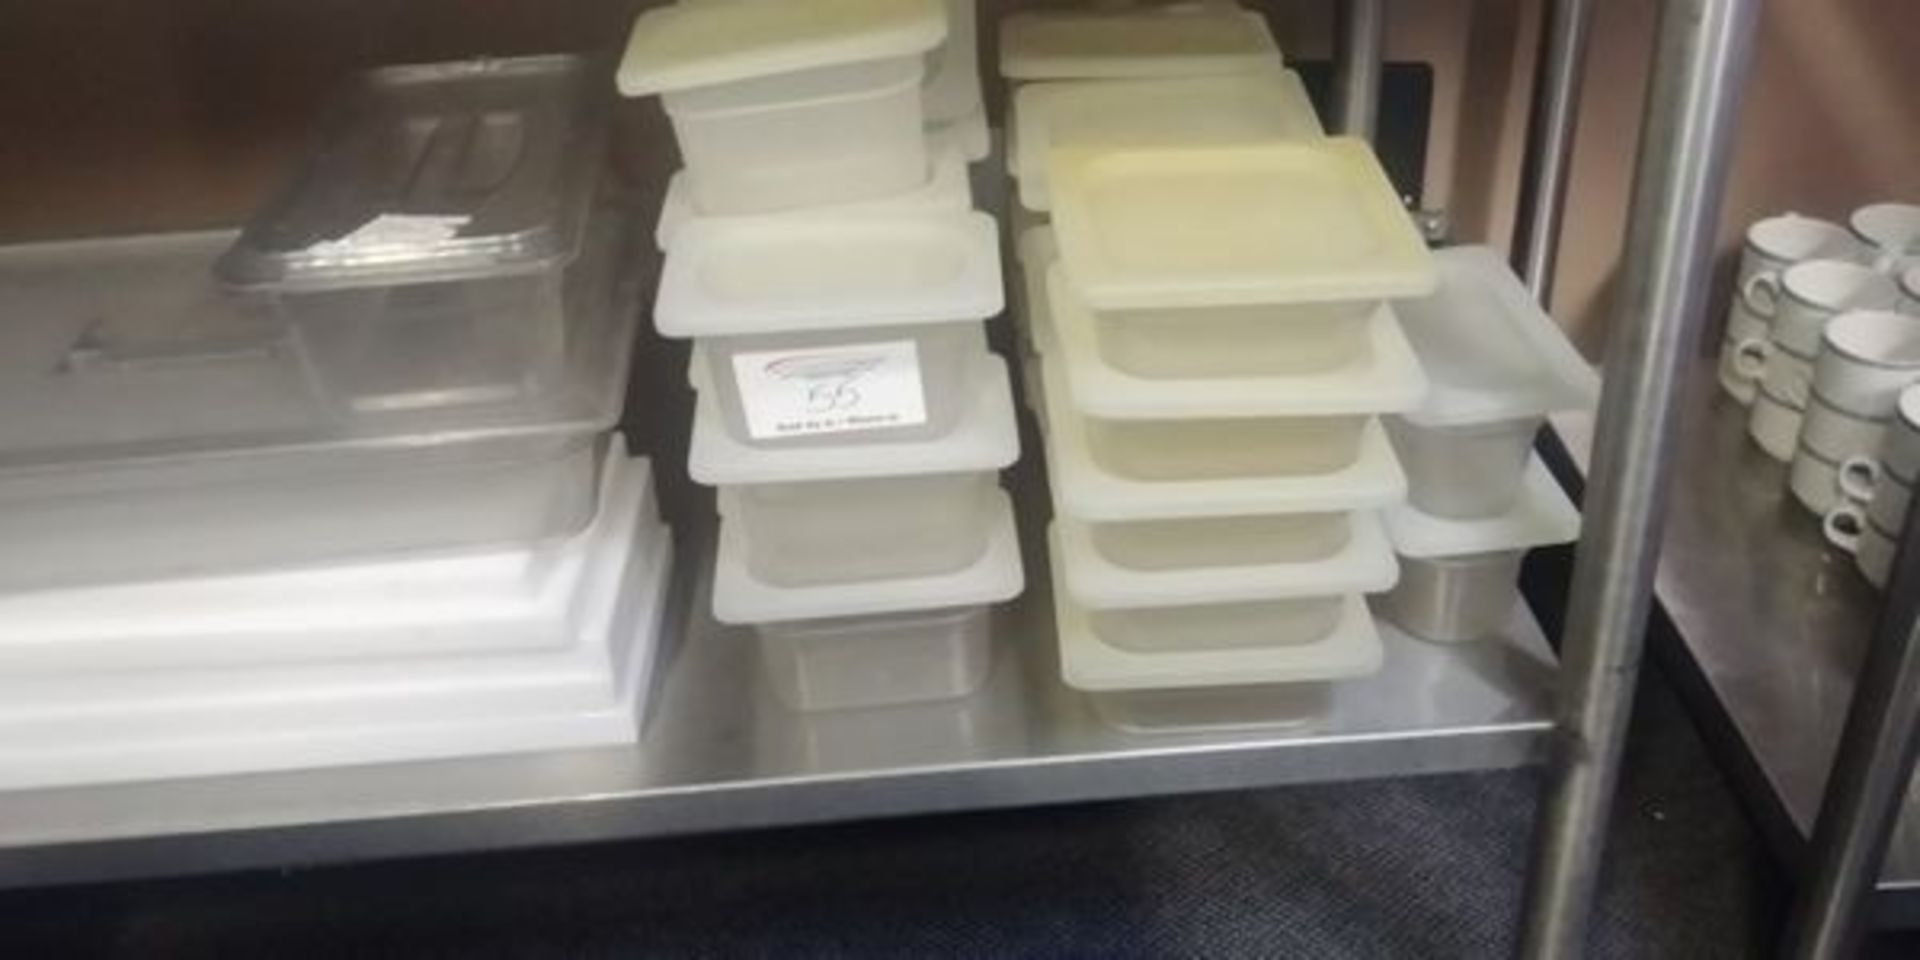 Approx. 34 Inserts with Lids